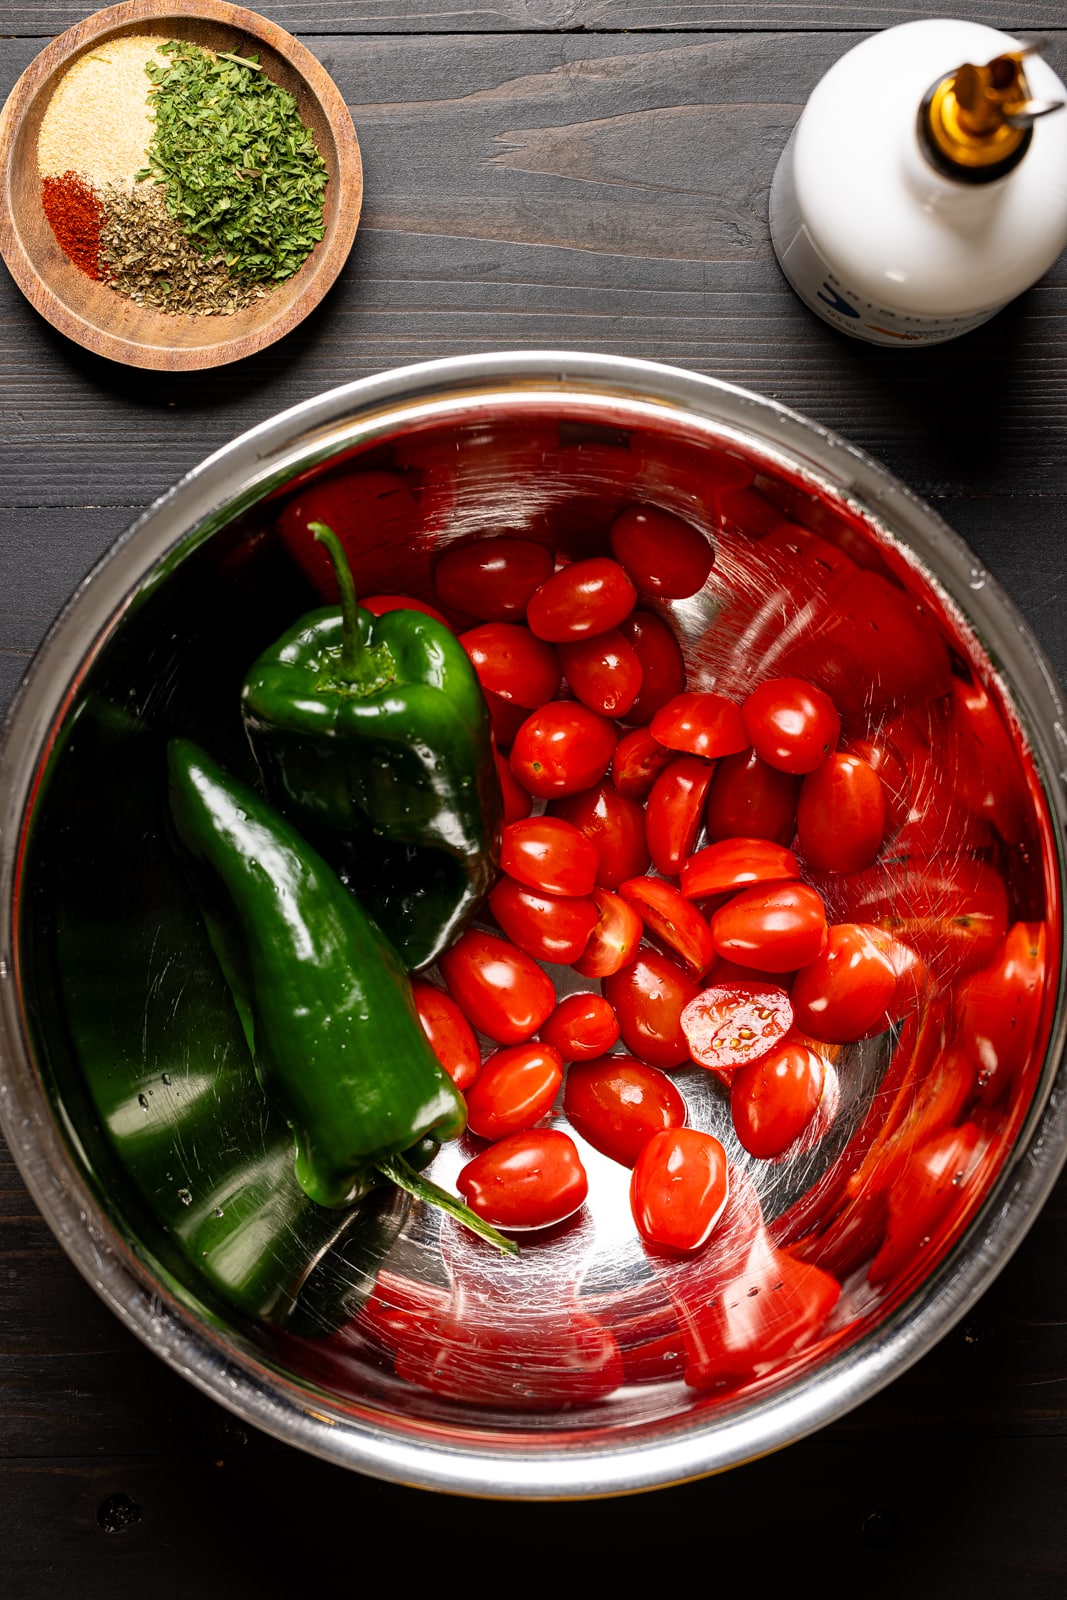 Tomatoes and peppers on a silver bowl with seasonings and olive oil.